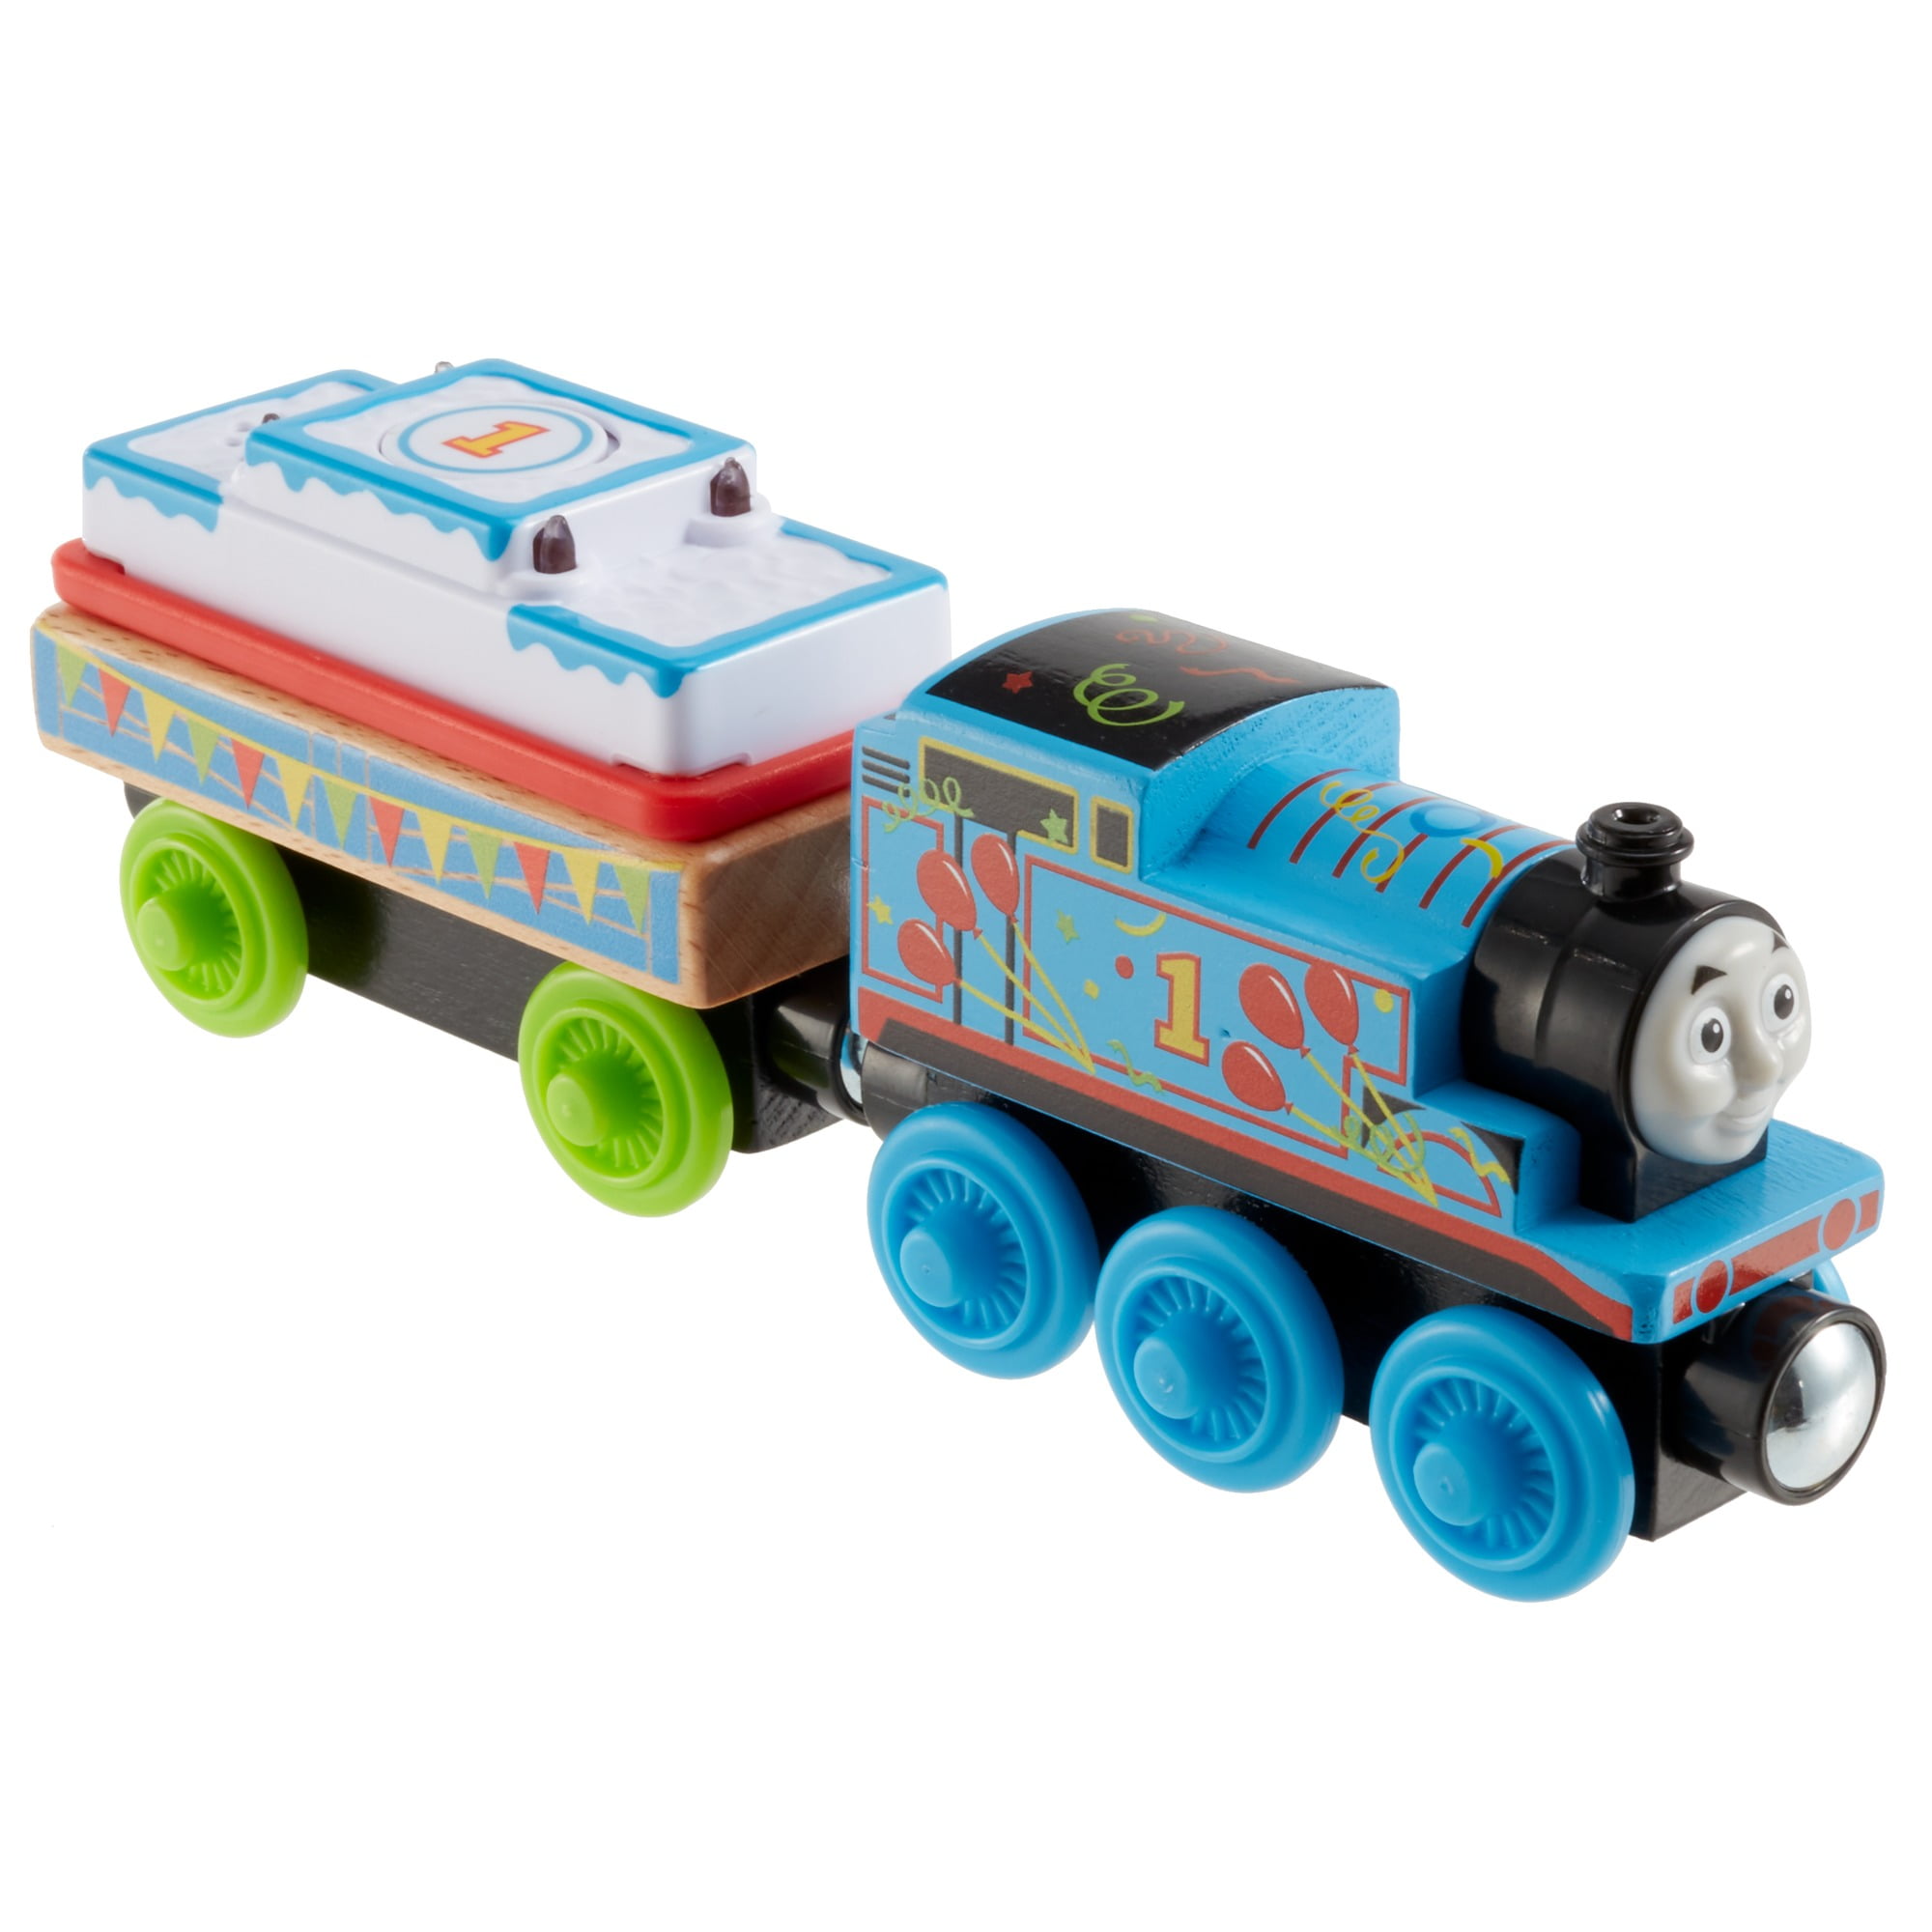 Thomas & Friends Wood Big World Adventures set with train engine figures a vehicle and accessories